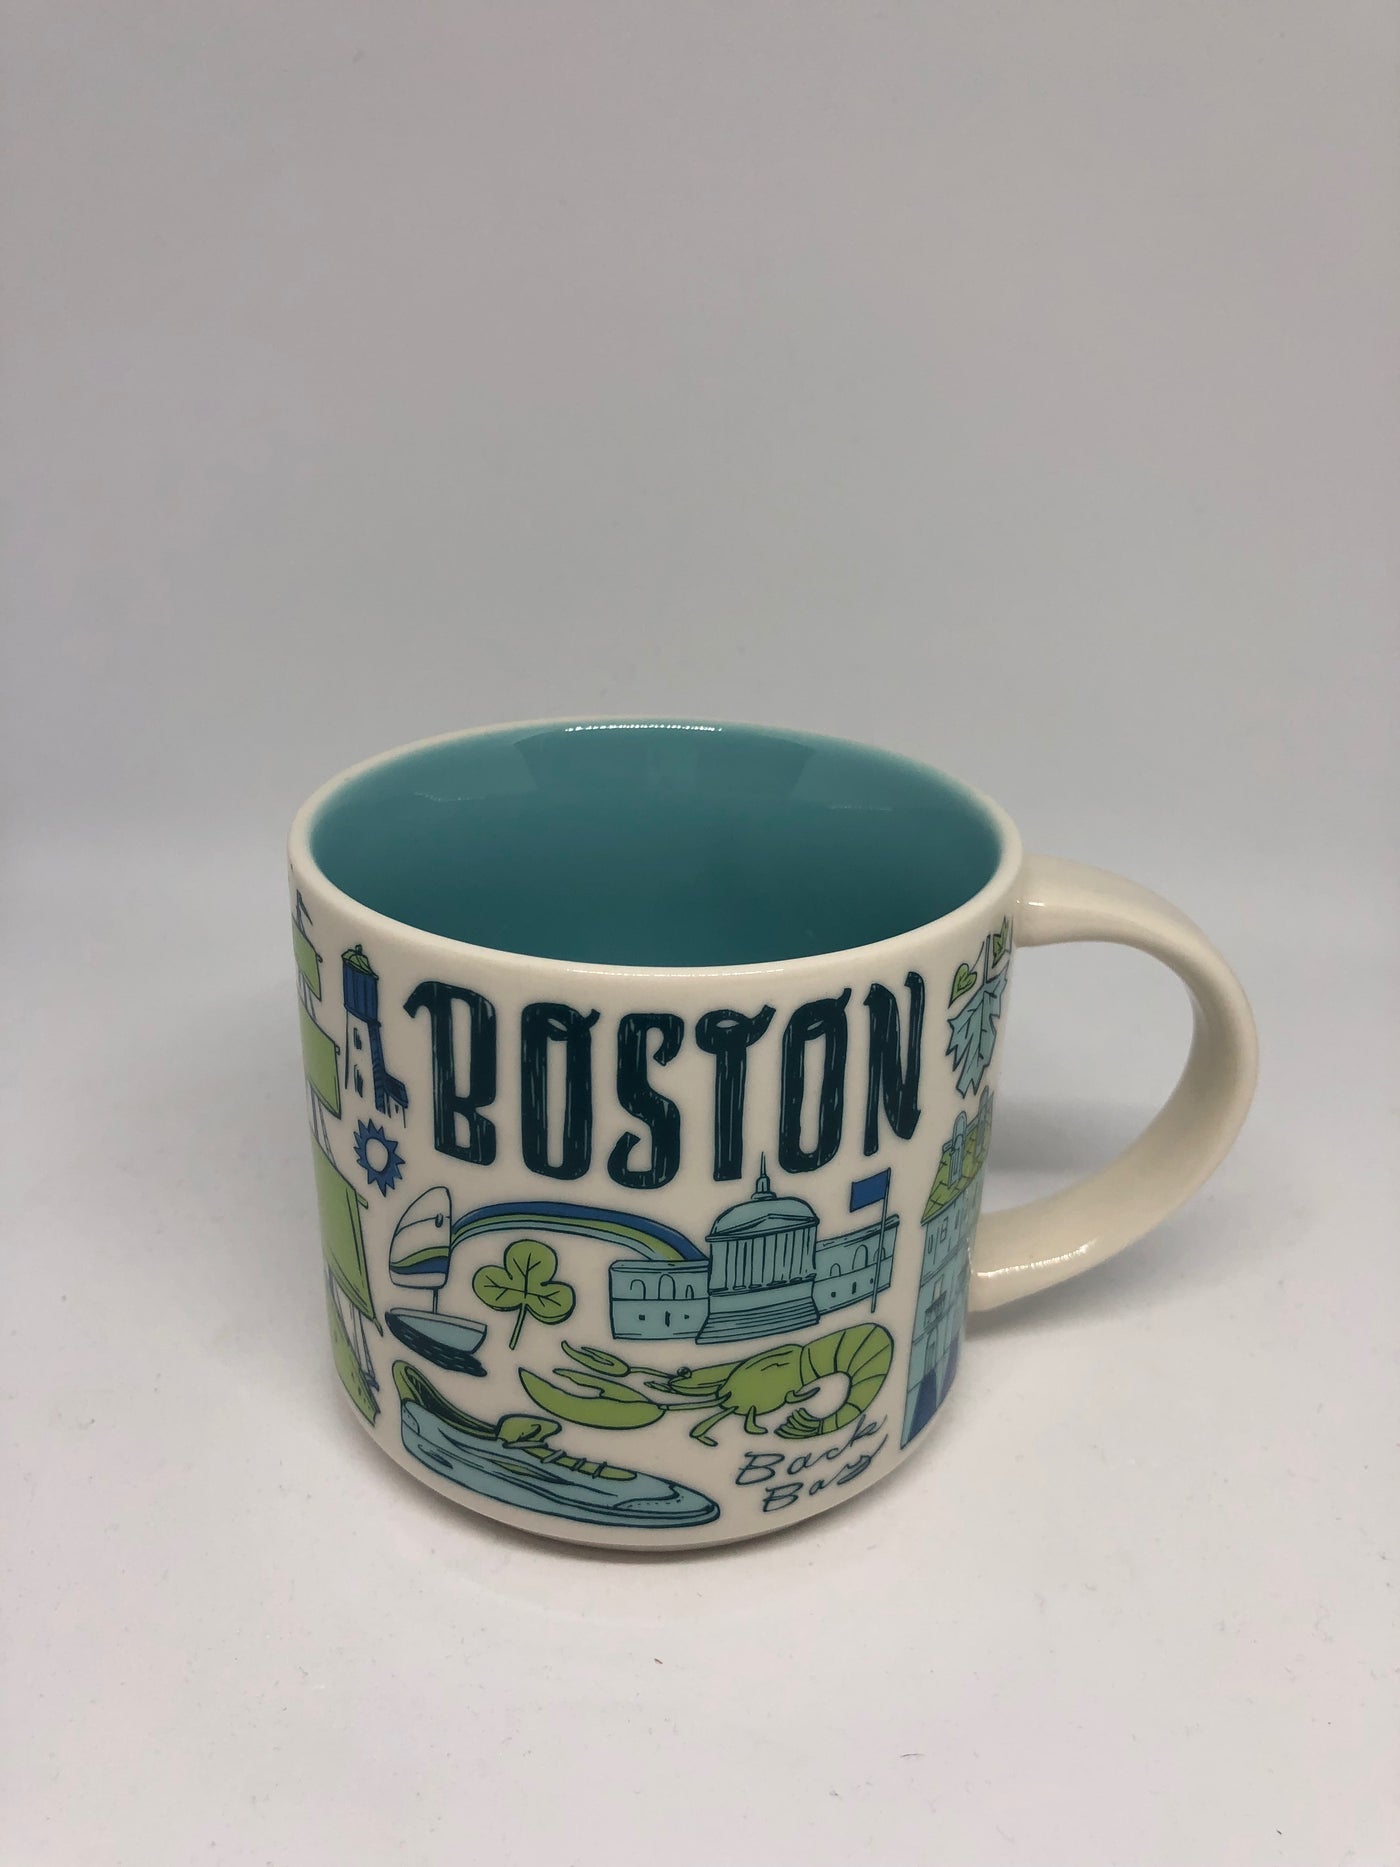 Starbucks Been There Series Collection Boston Coffee Mug New With Box